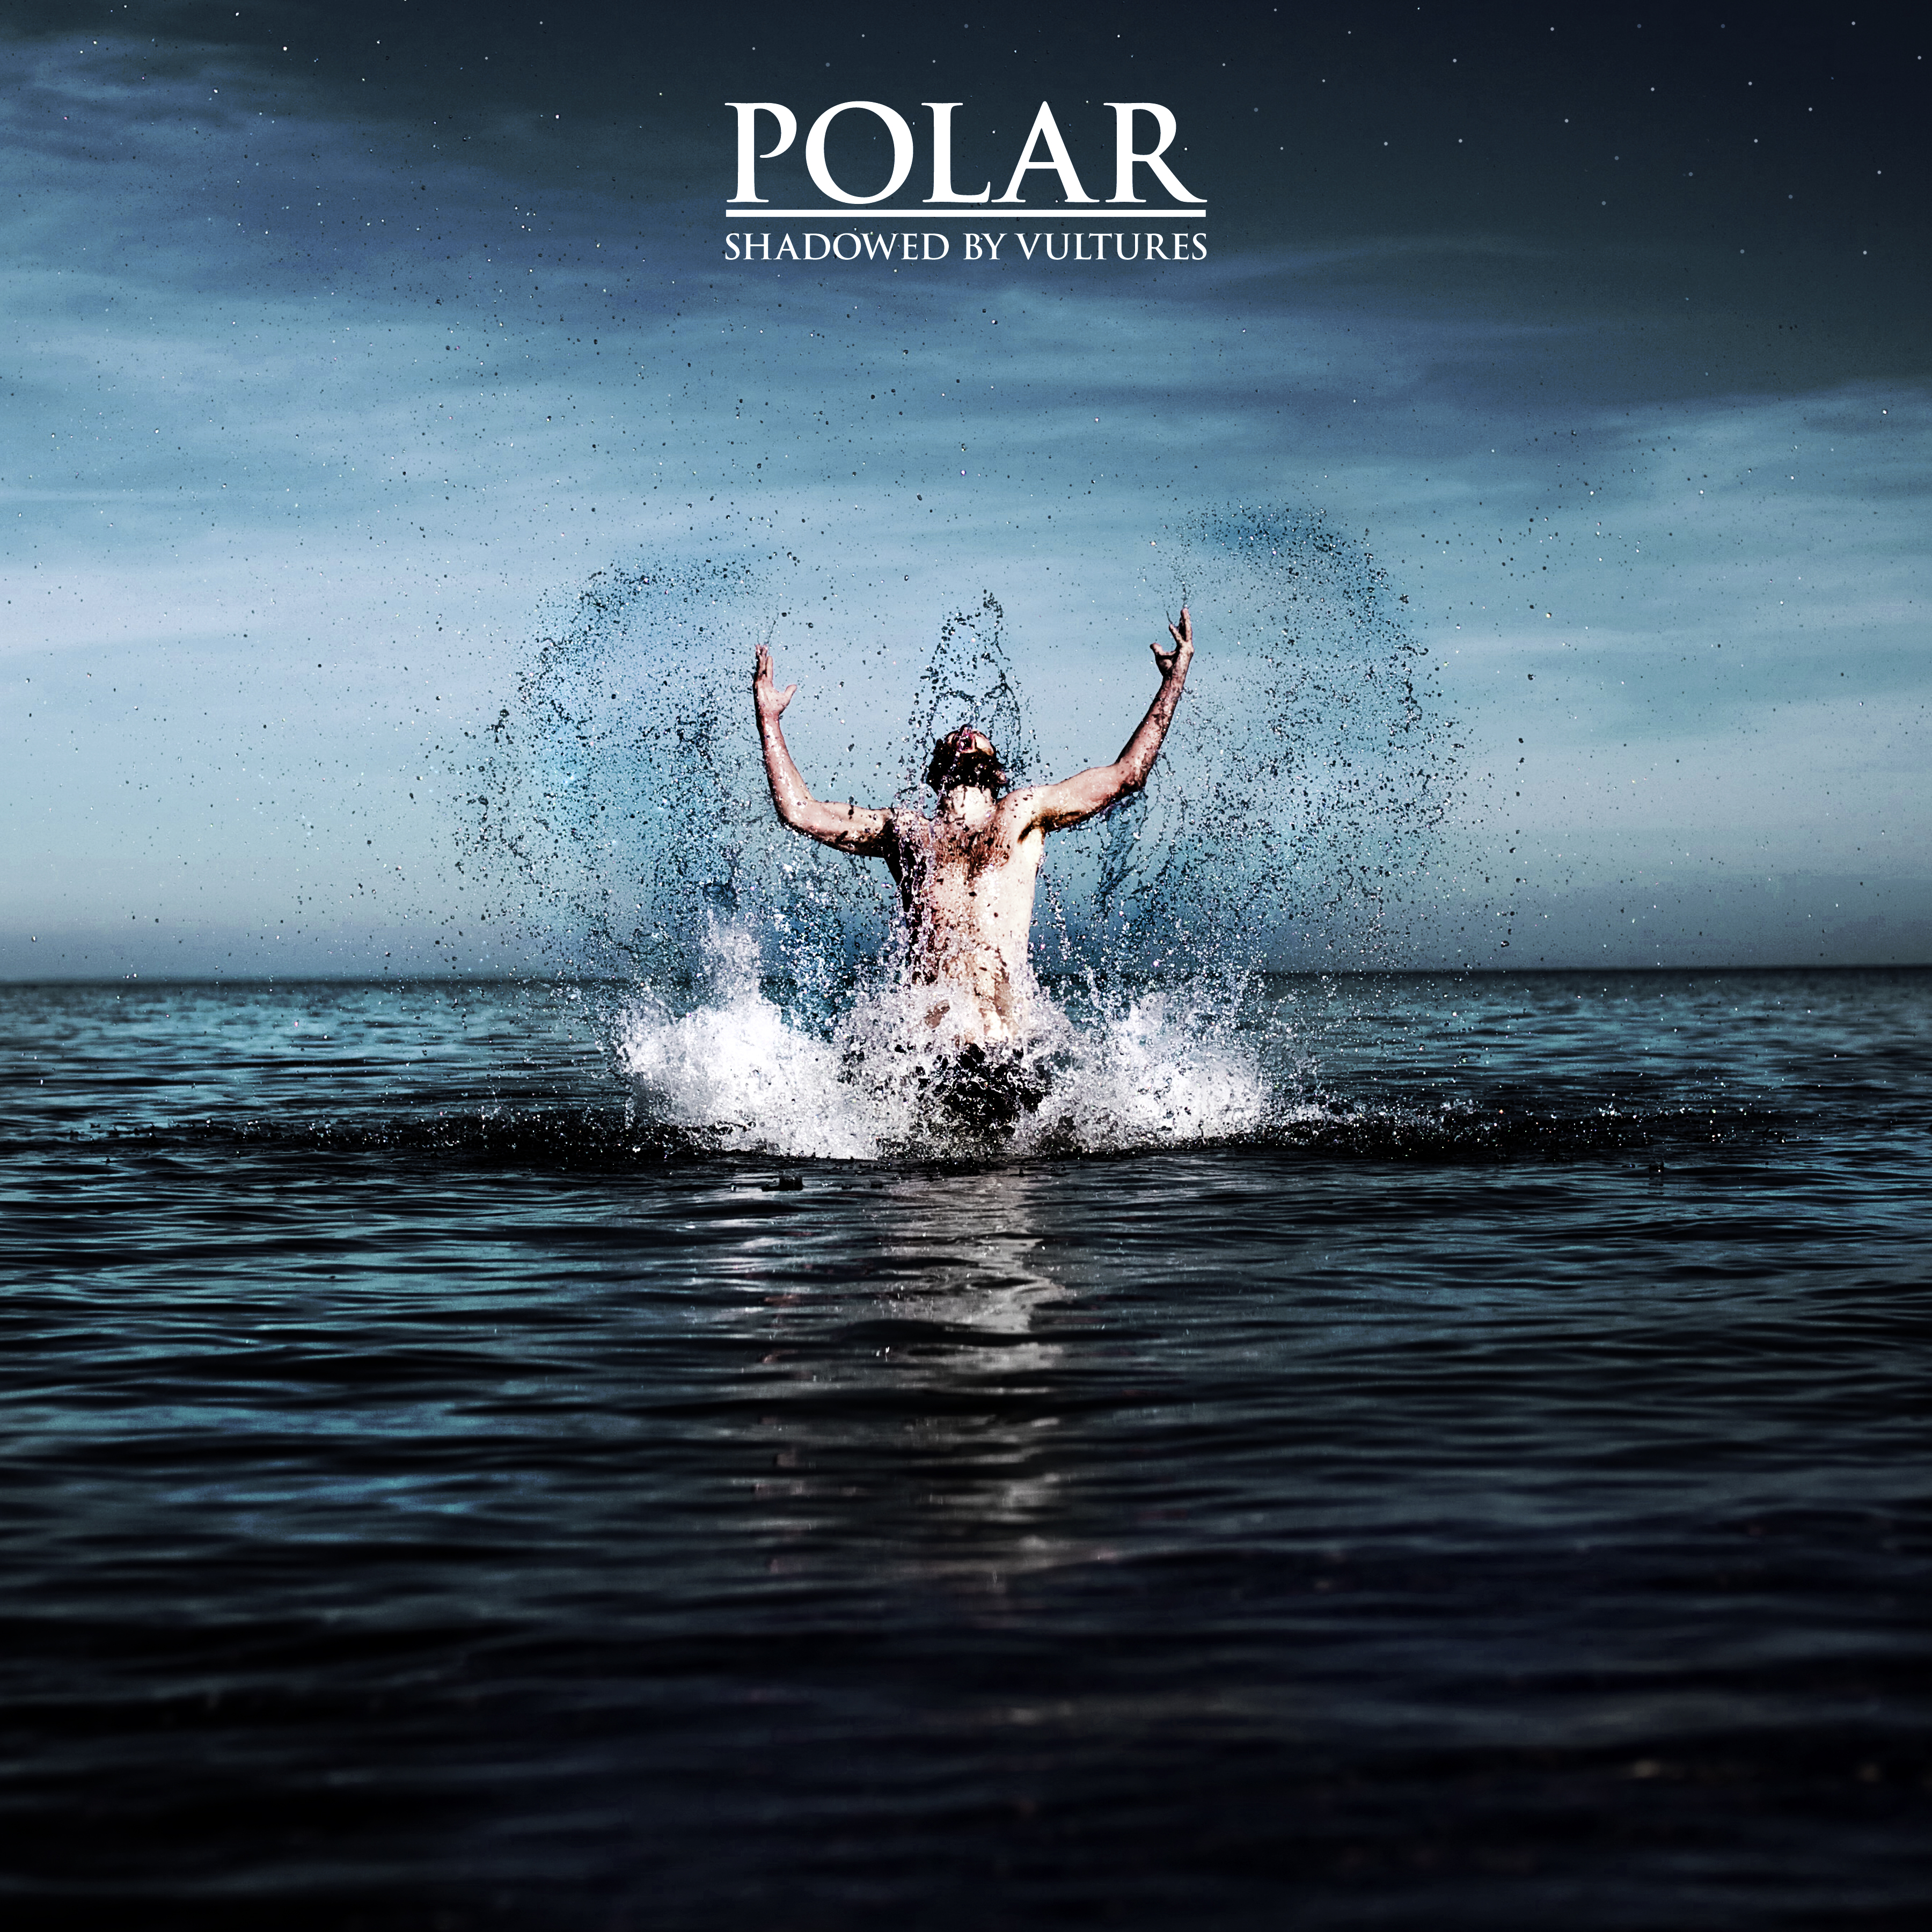 POLAR - Shadowed By Vultures